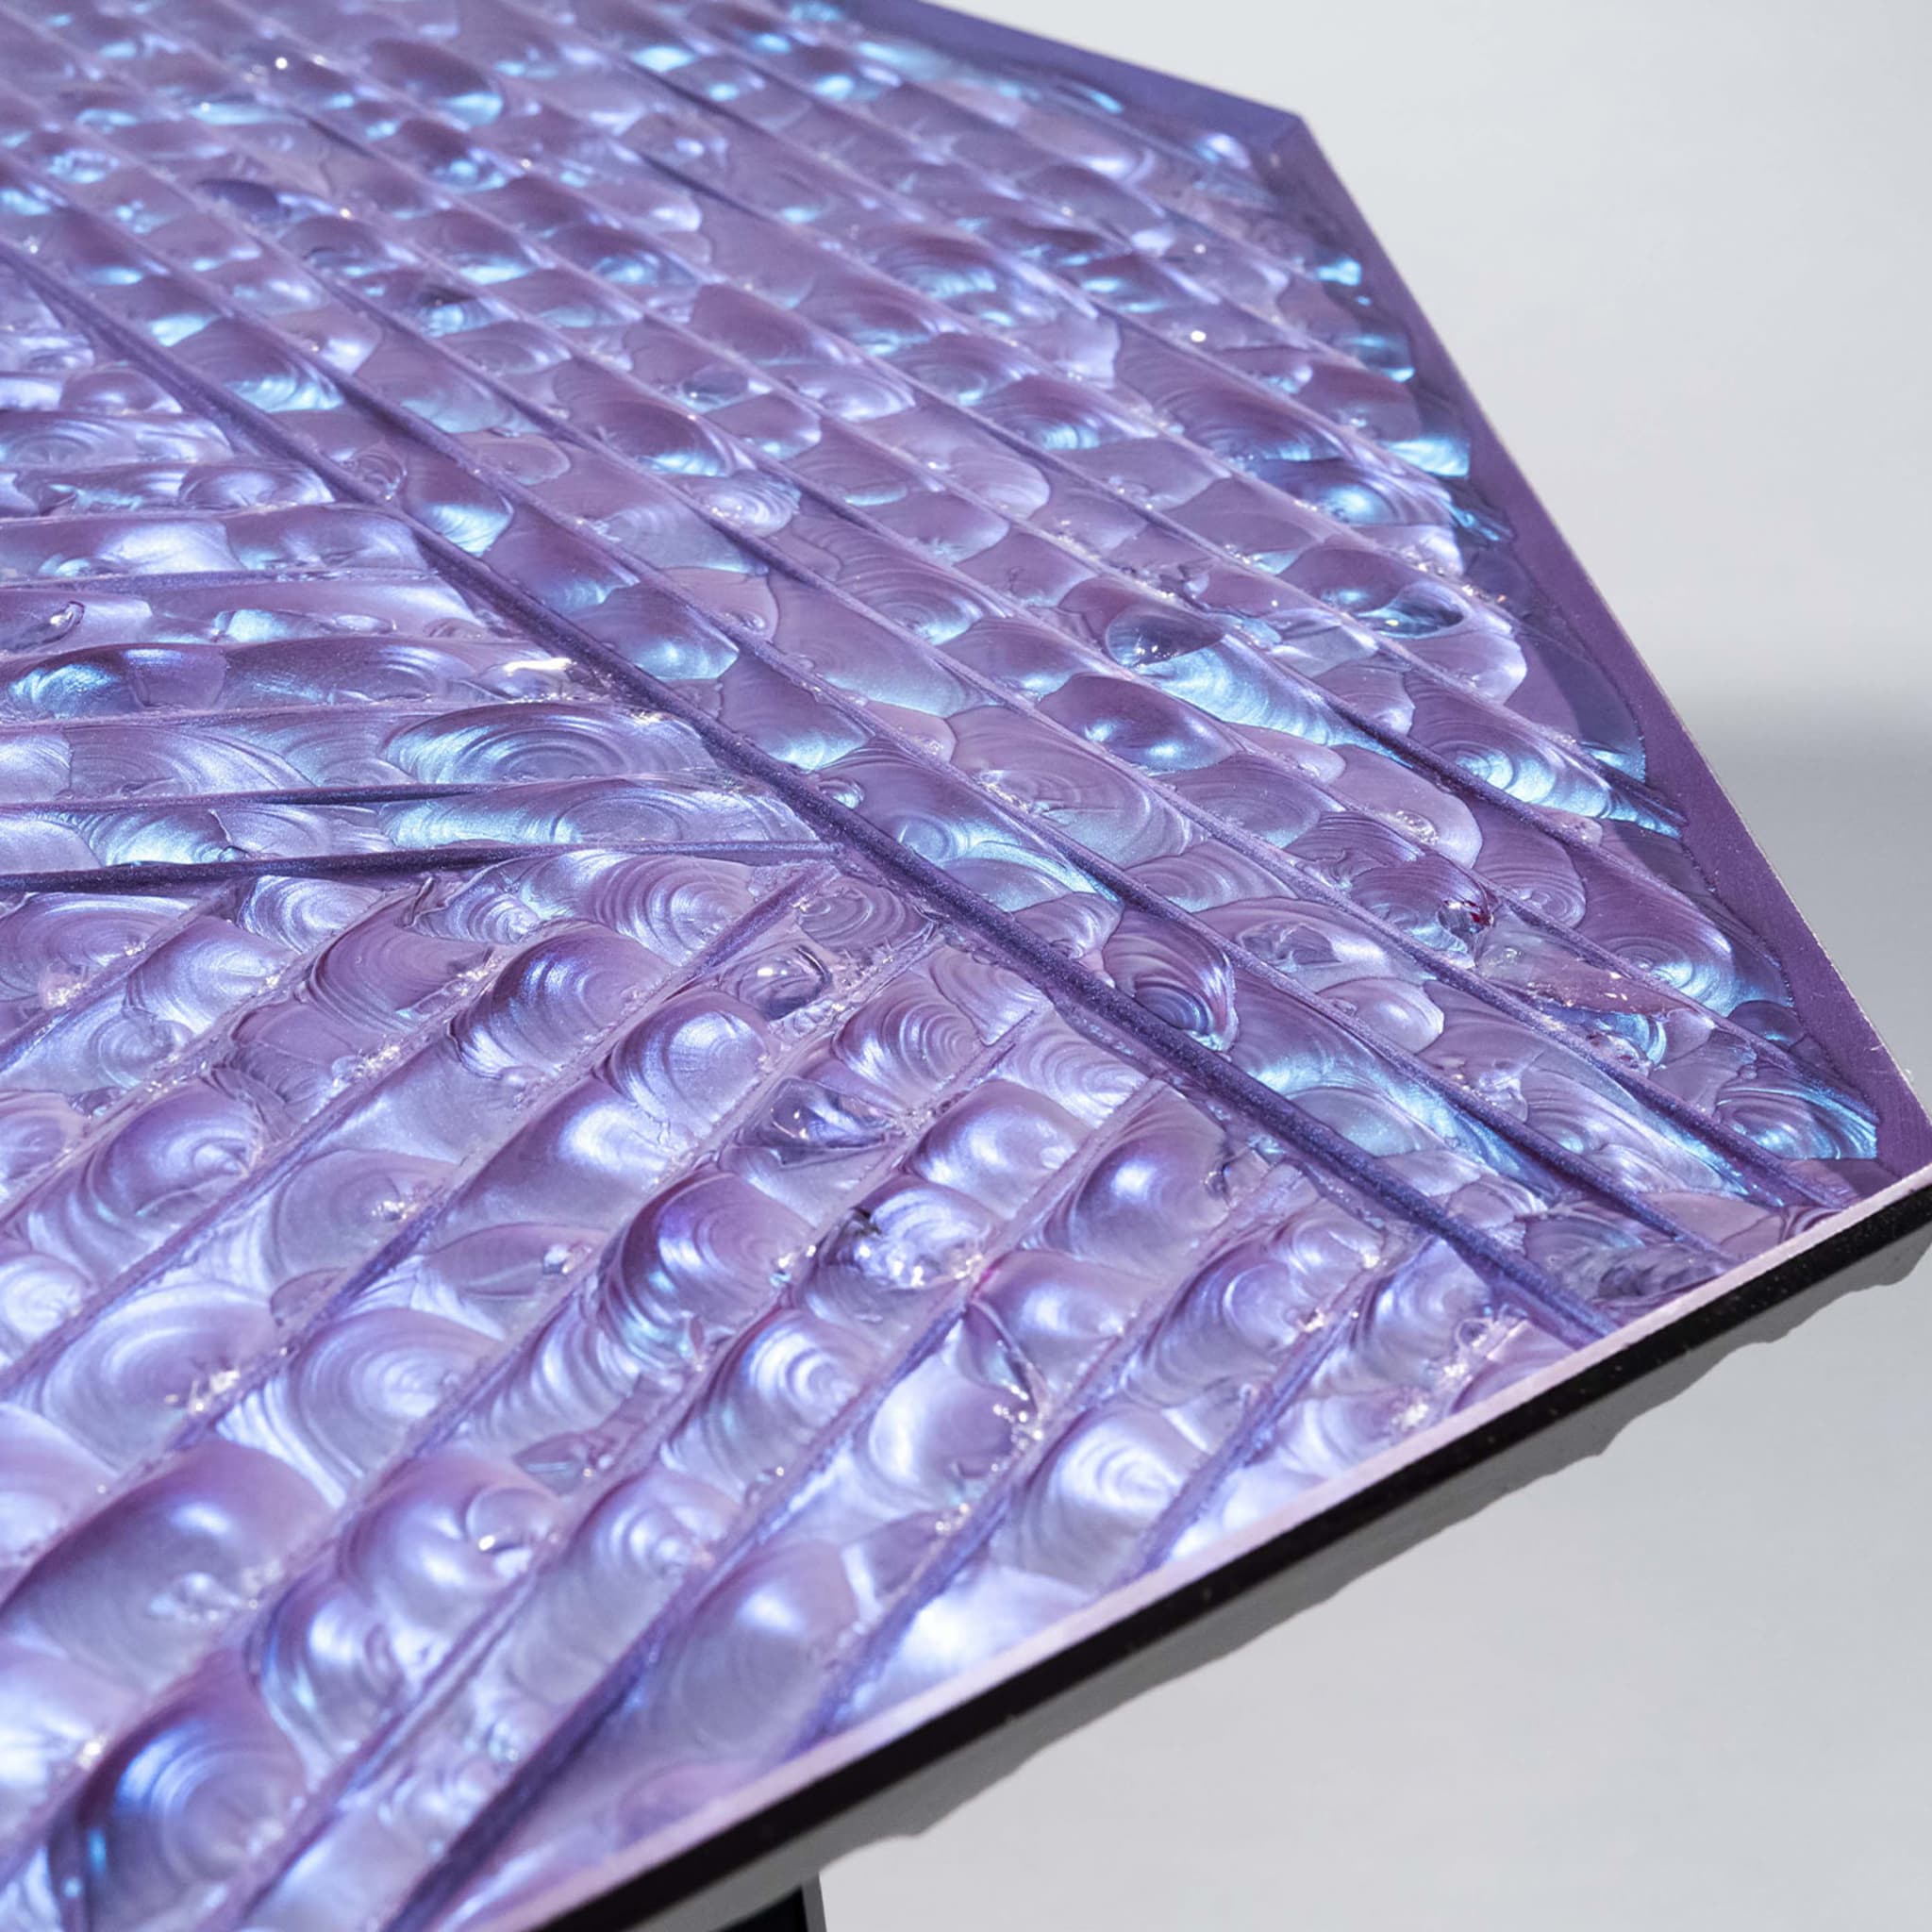 Velluto Iridescent Crystal Coffee Table - Alternative view 3